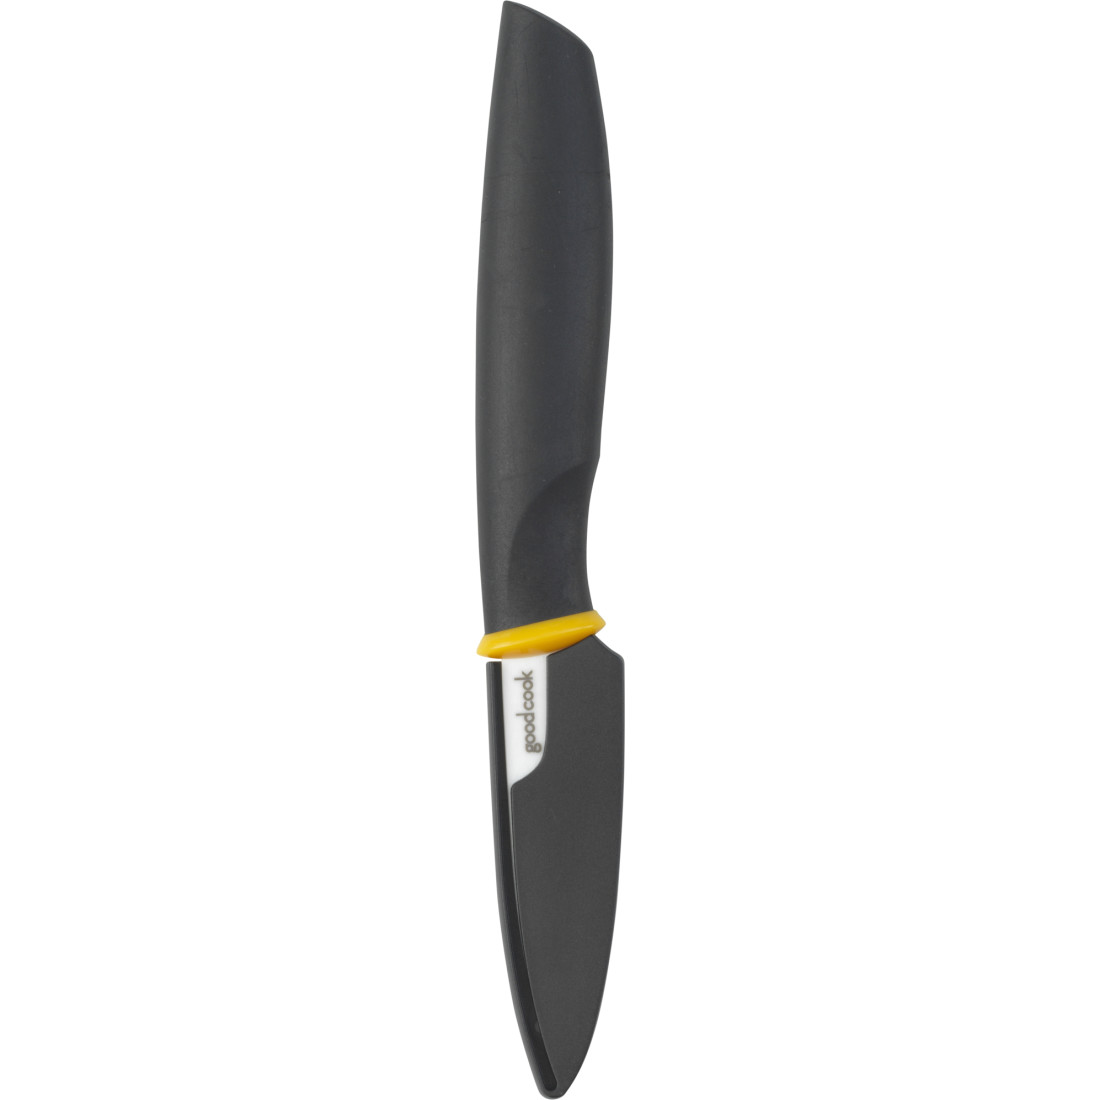 Global 3 Paring Knife – The Happy Cook